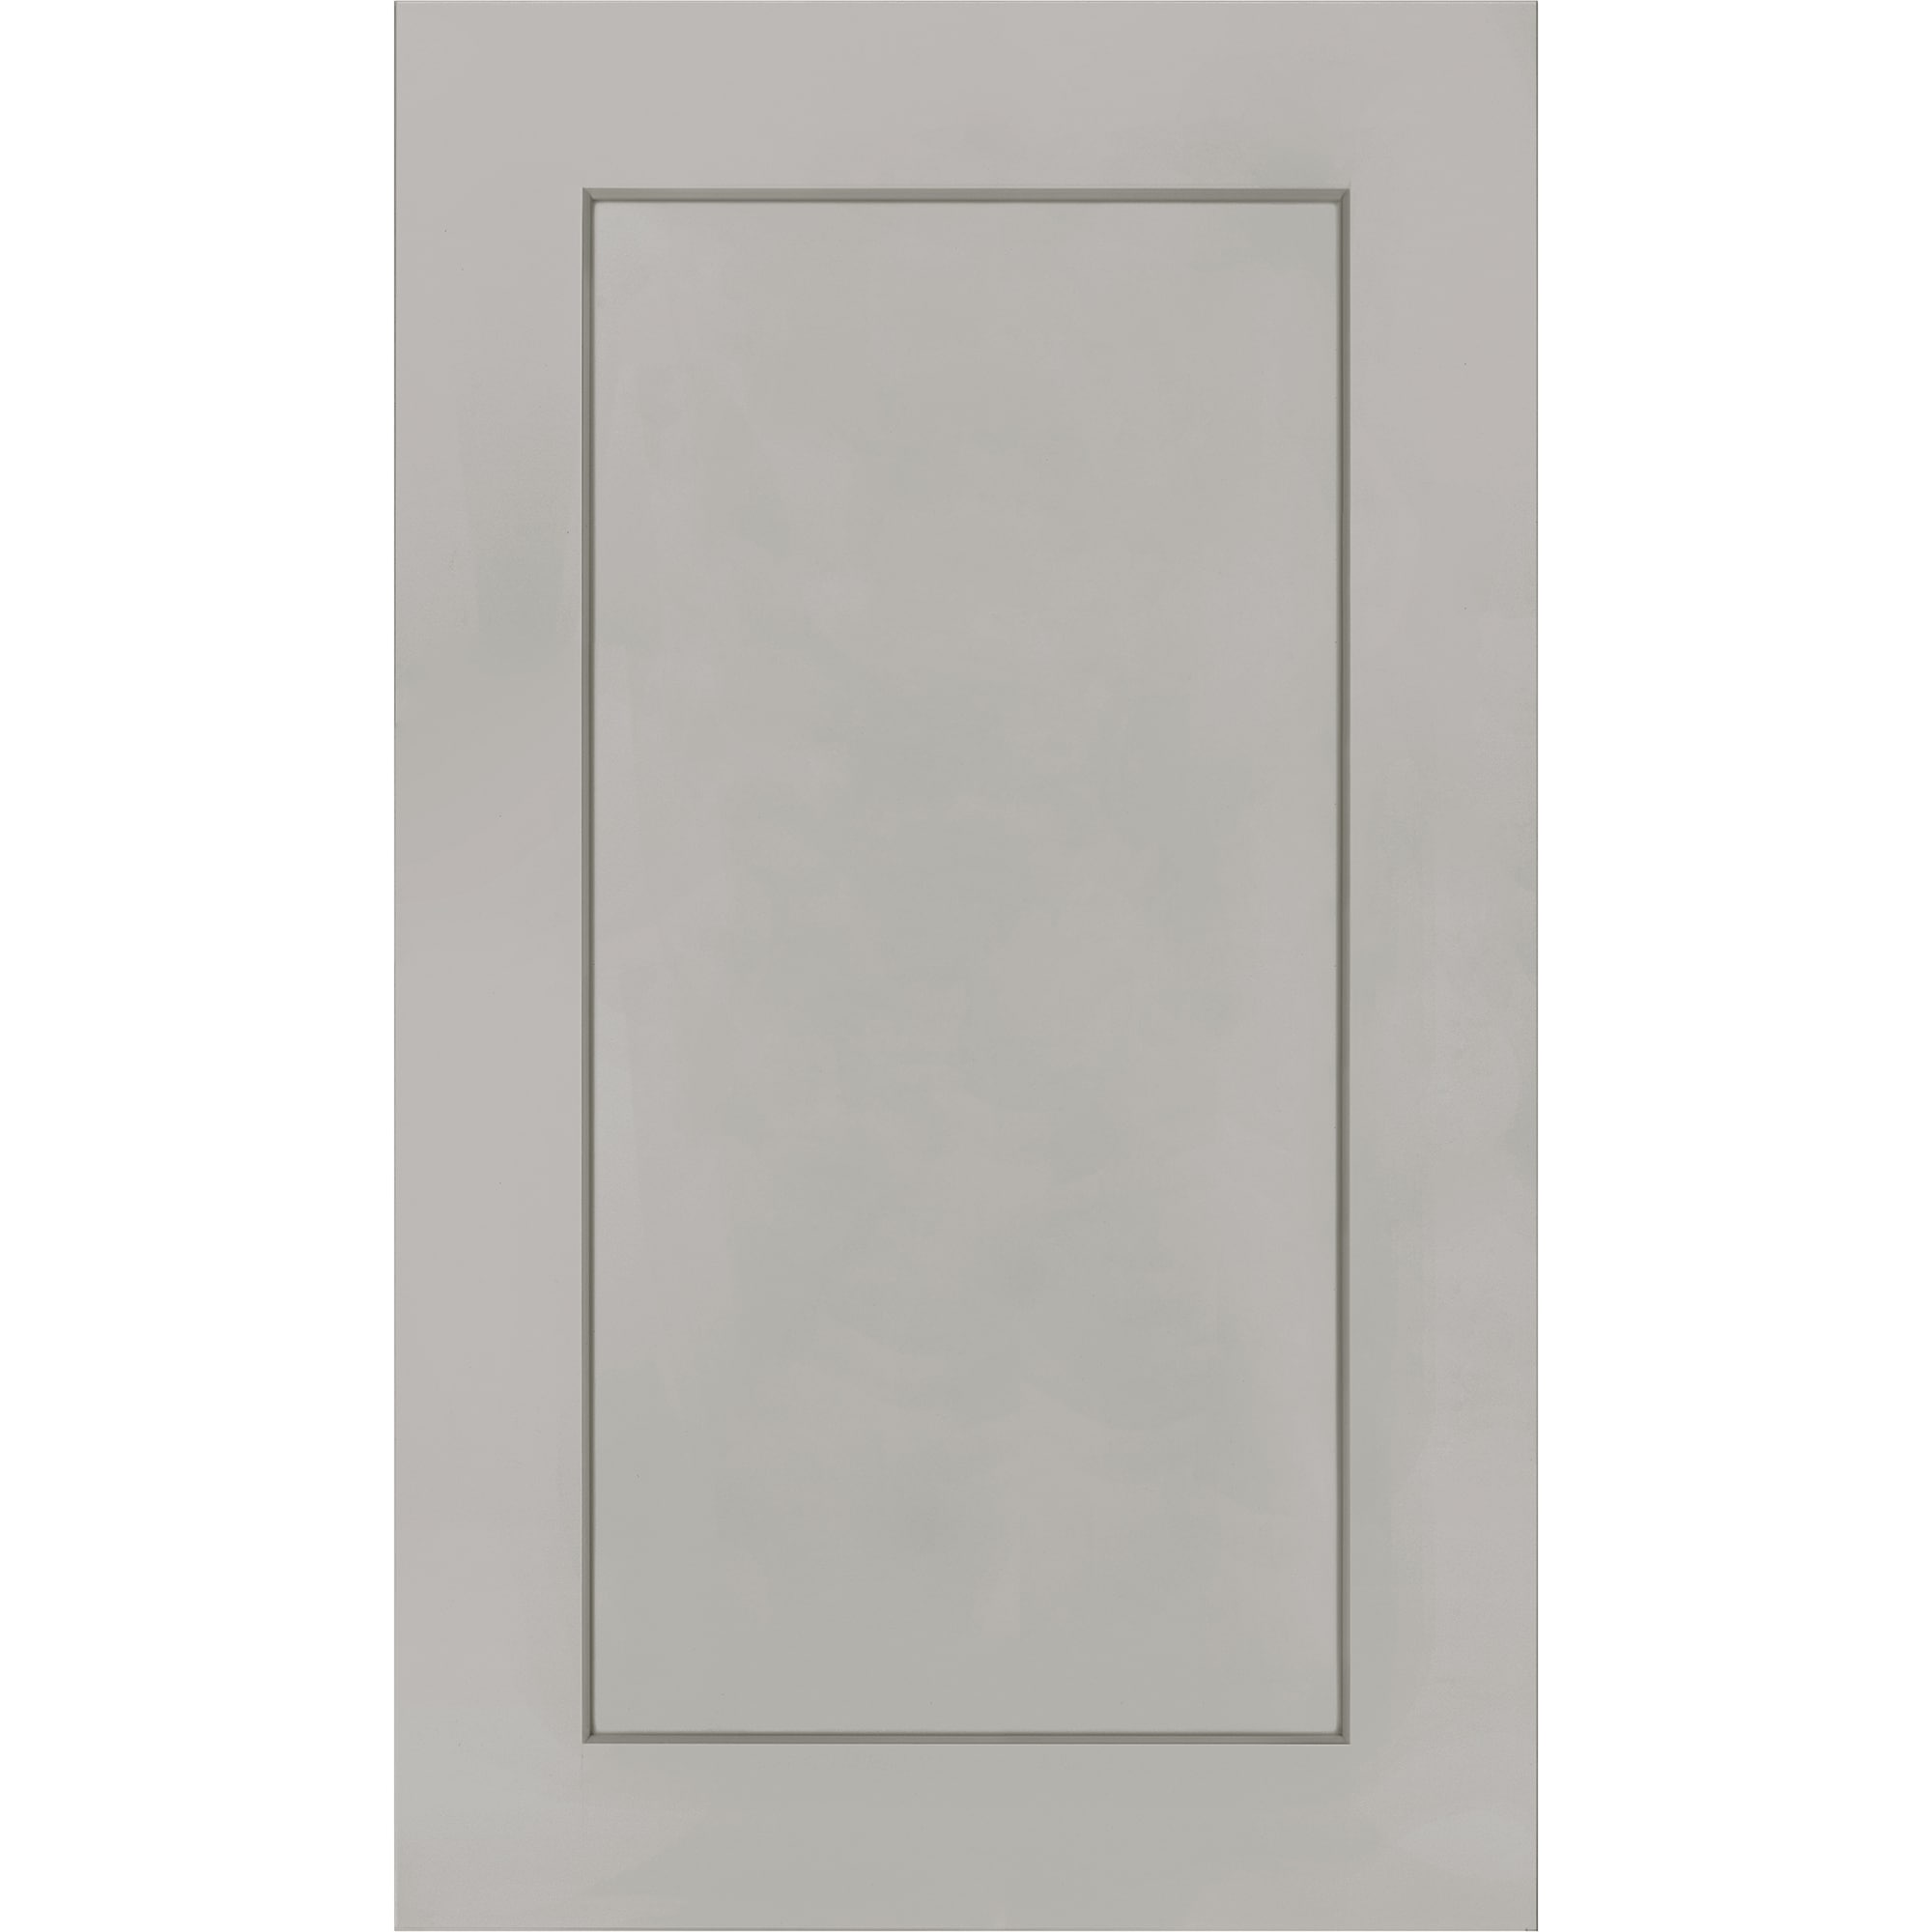 allen + roth Stonewall 28.75-in W x 3.375-in H x 21-in D Natural Stained Cabinet  Roll-out Tray in the Kitchen Cabinet Accessories department at